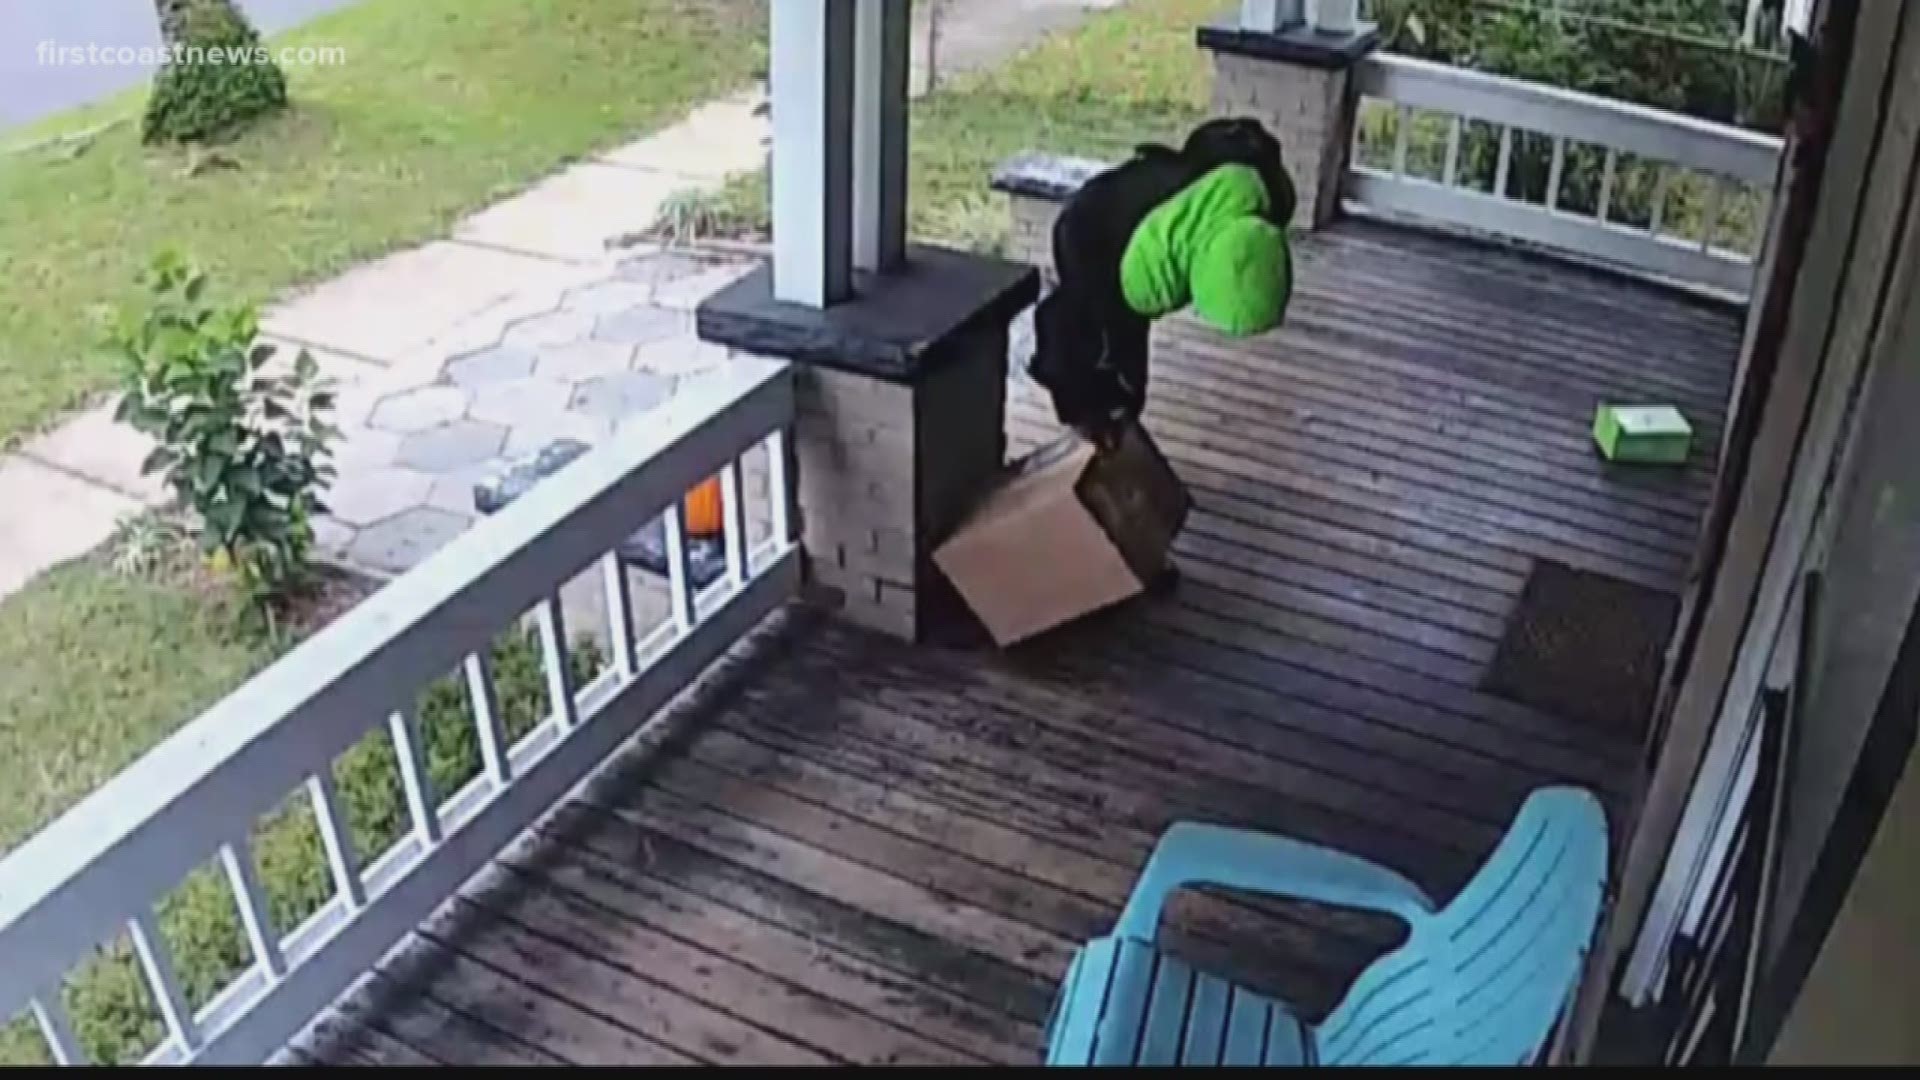 Online shopping is on the rise and unfortunately so is the number of people falling victim to theft from so-called 'porch pirates.'